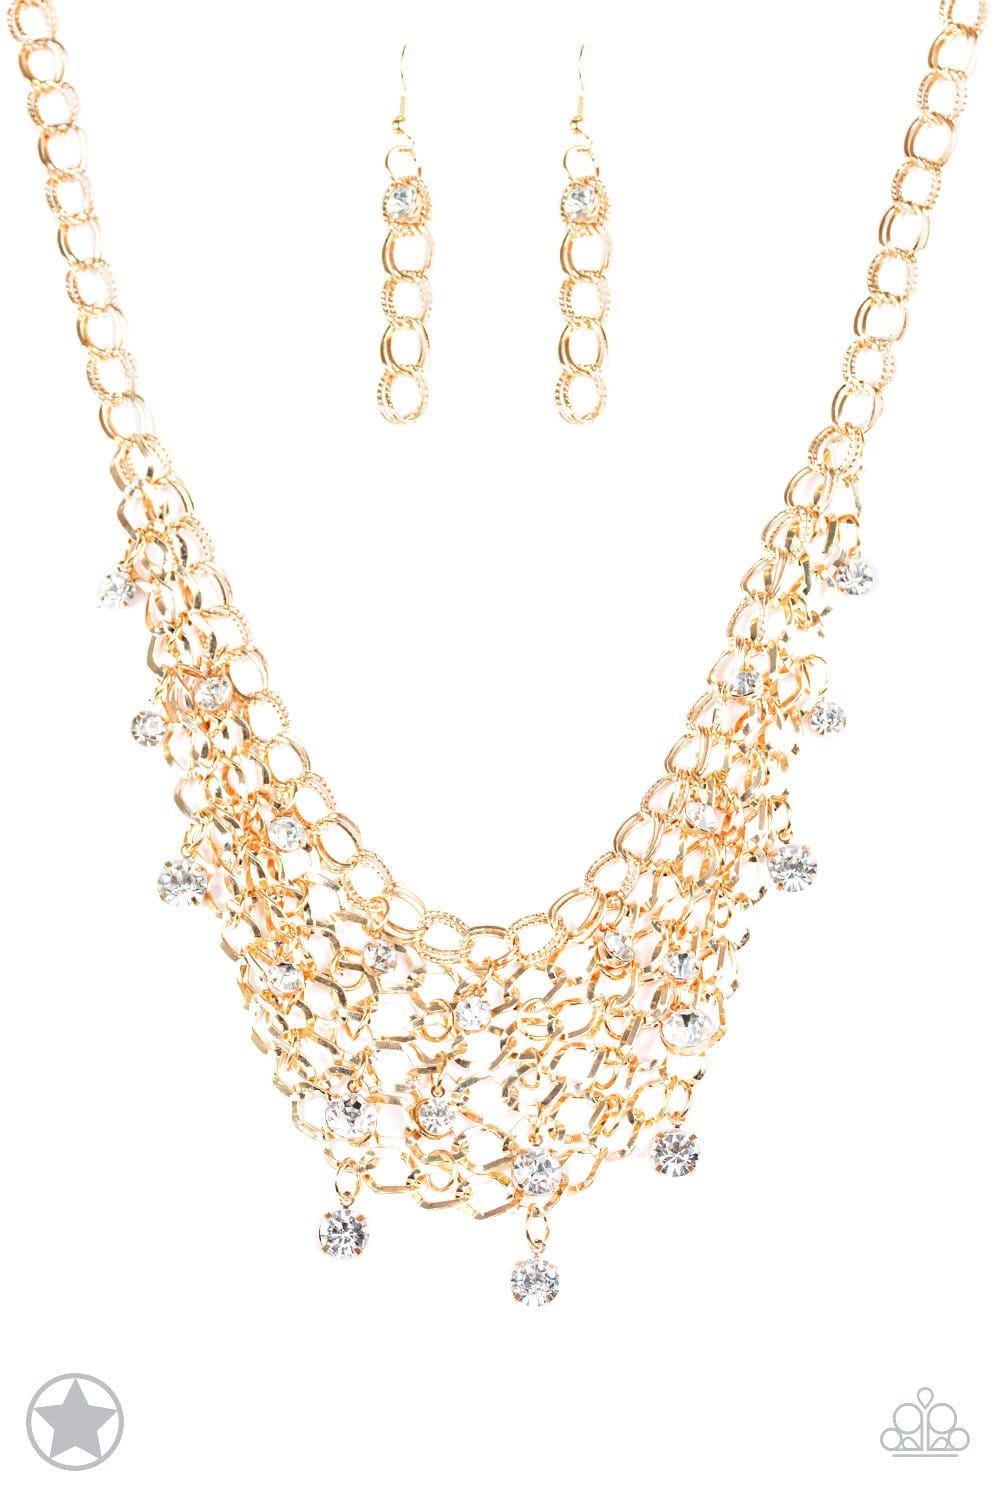 Paparazzi BLOCKBUSTERS: Fishing for Compliments - Gold Necklace - Jewels N’ Thingz Boutique